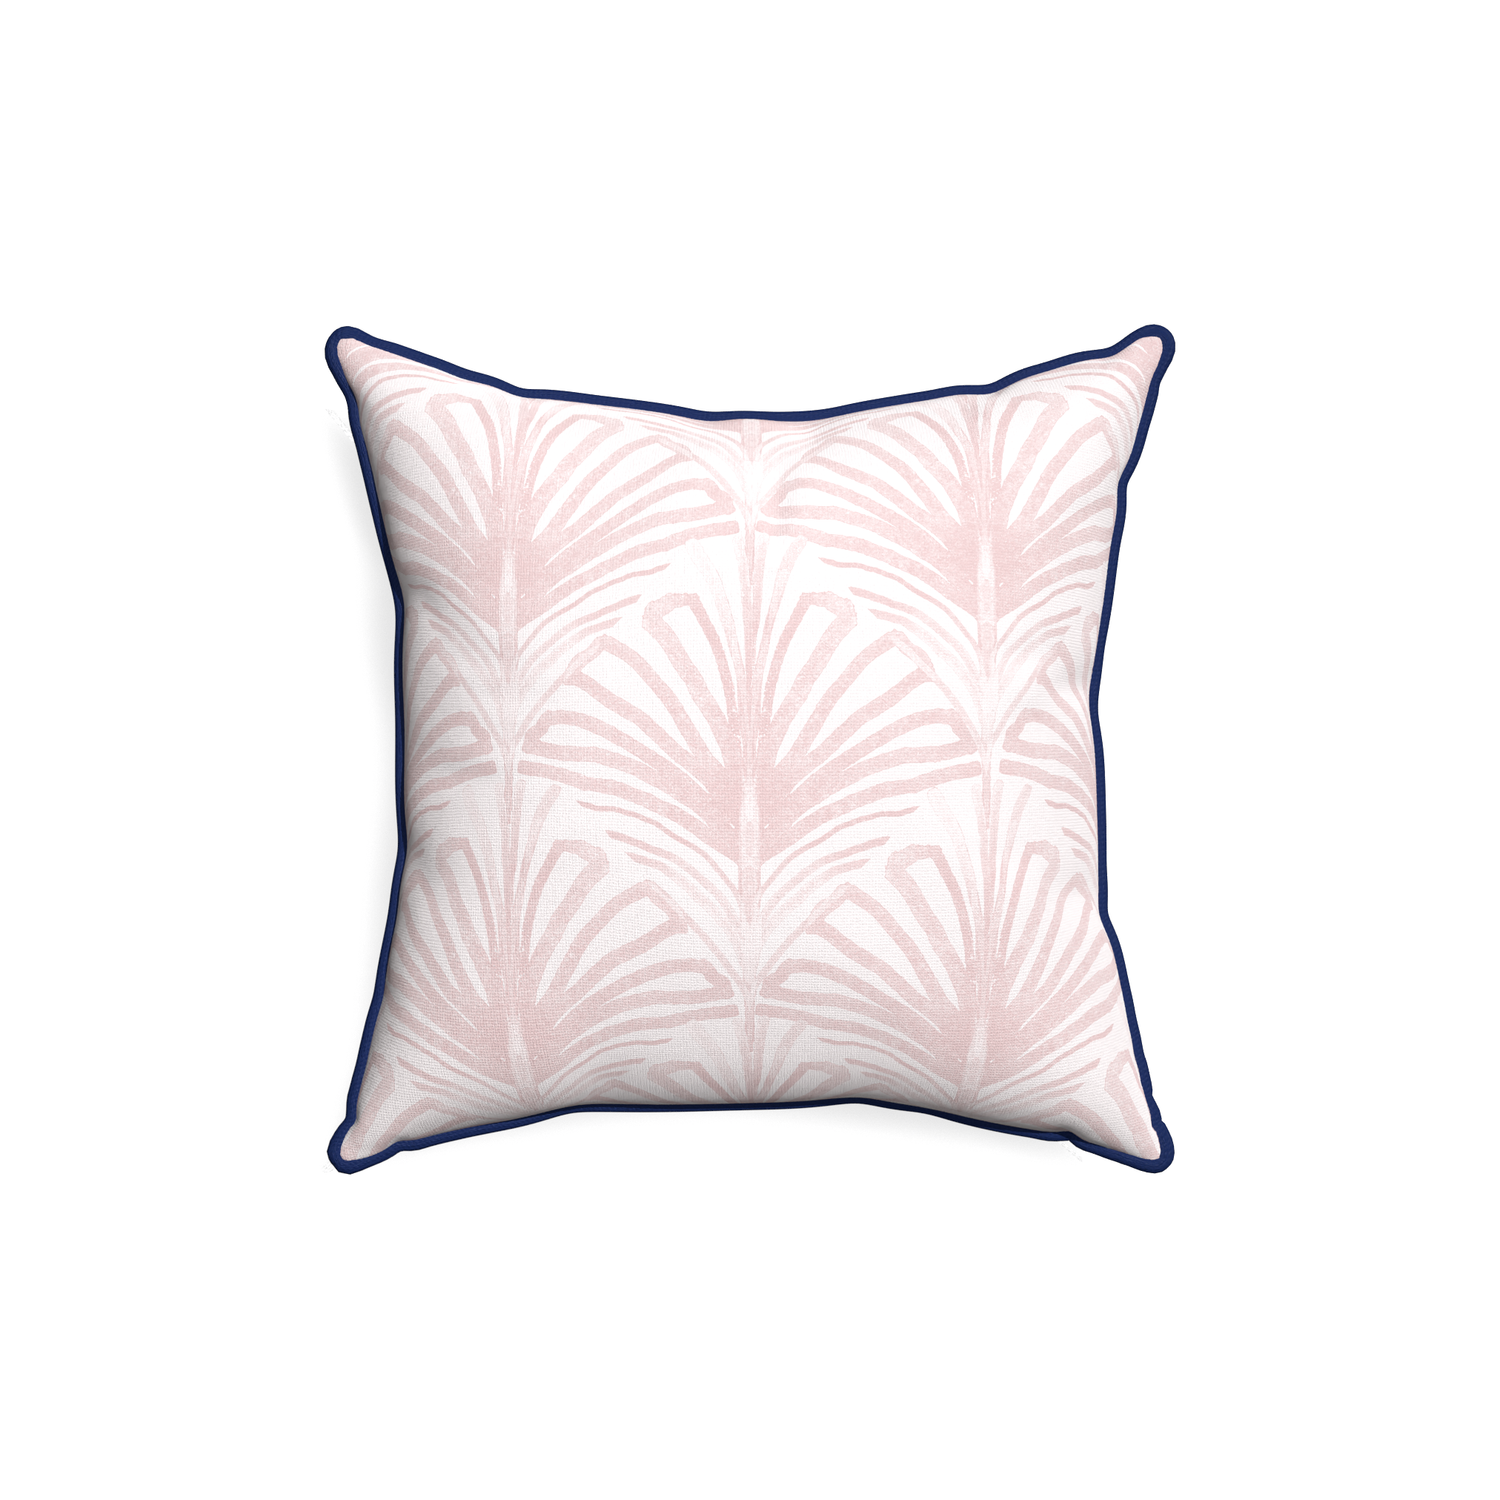 18-square suzy rose custom pillow with midnight piping on white background